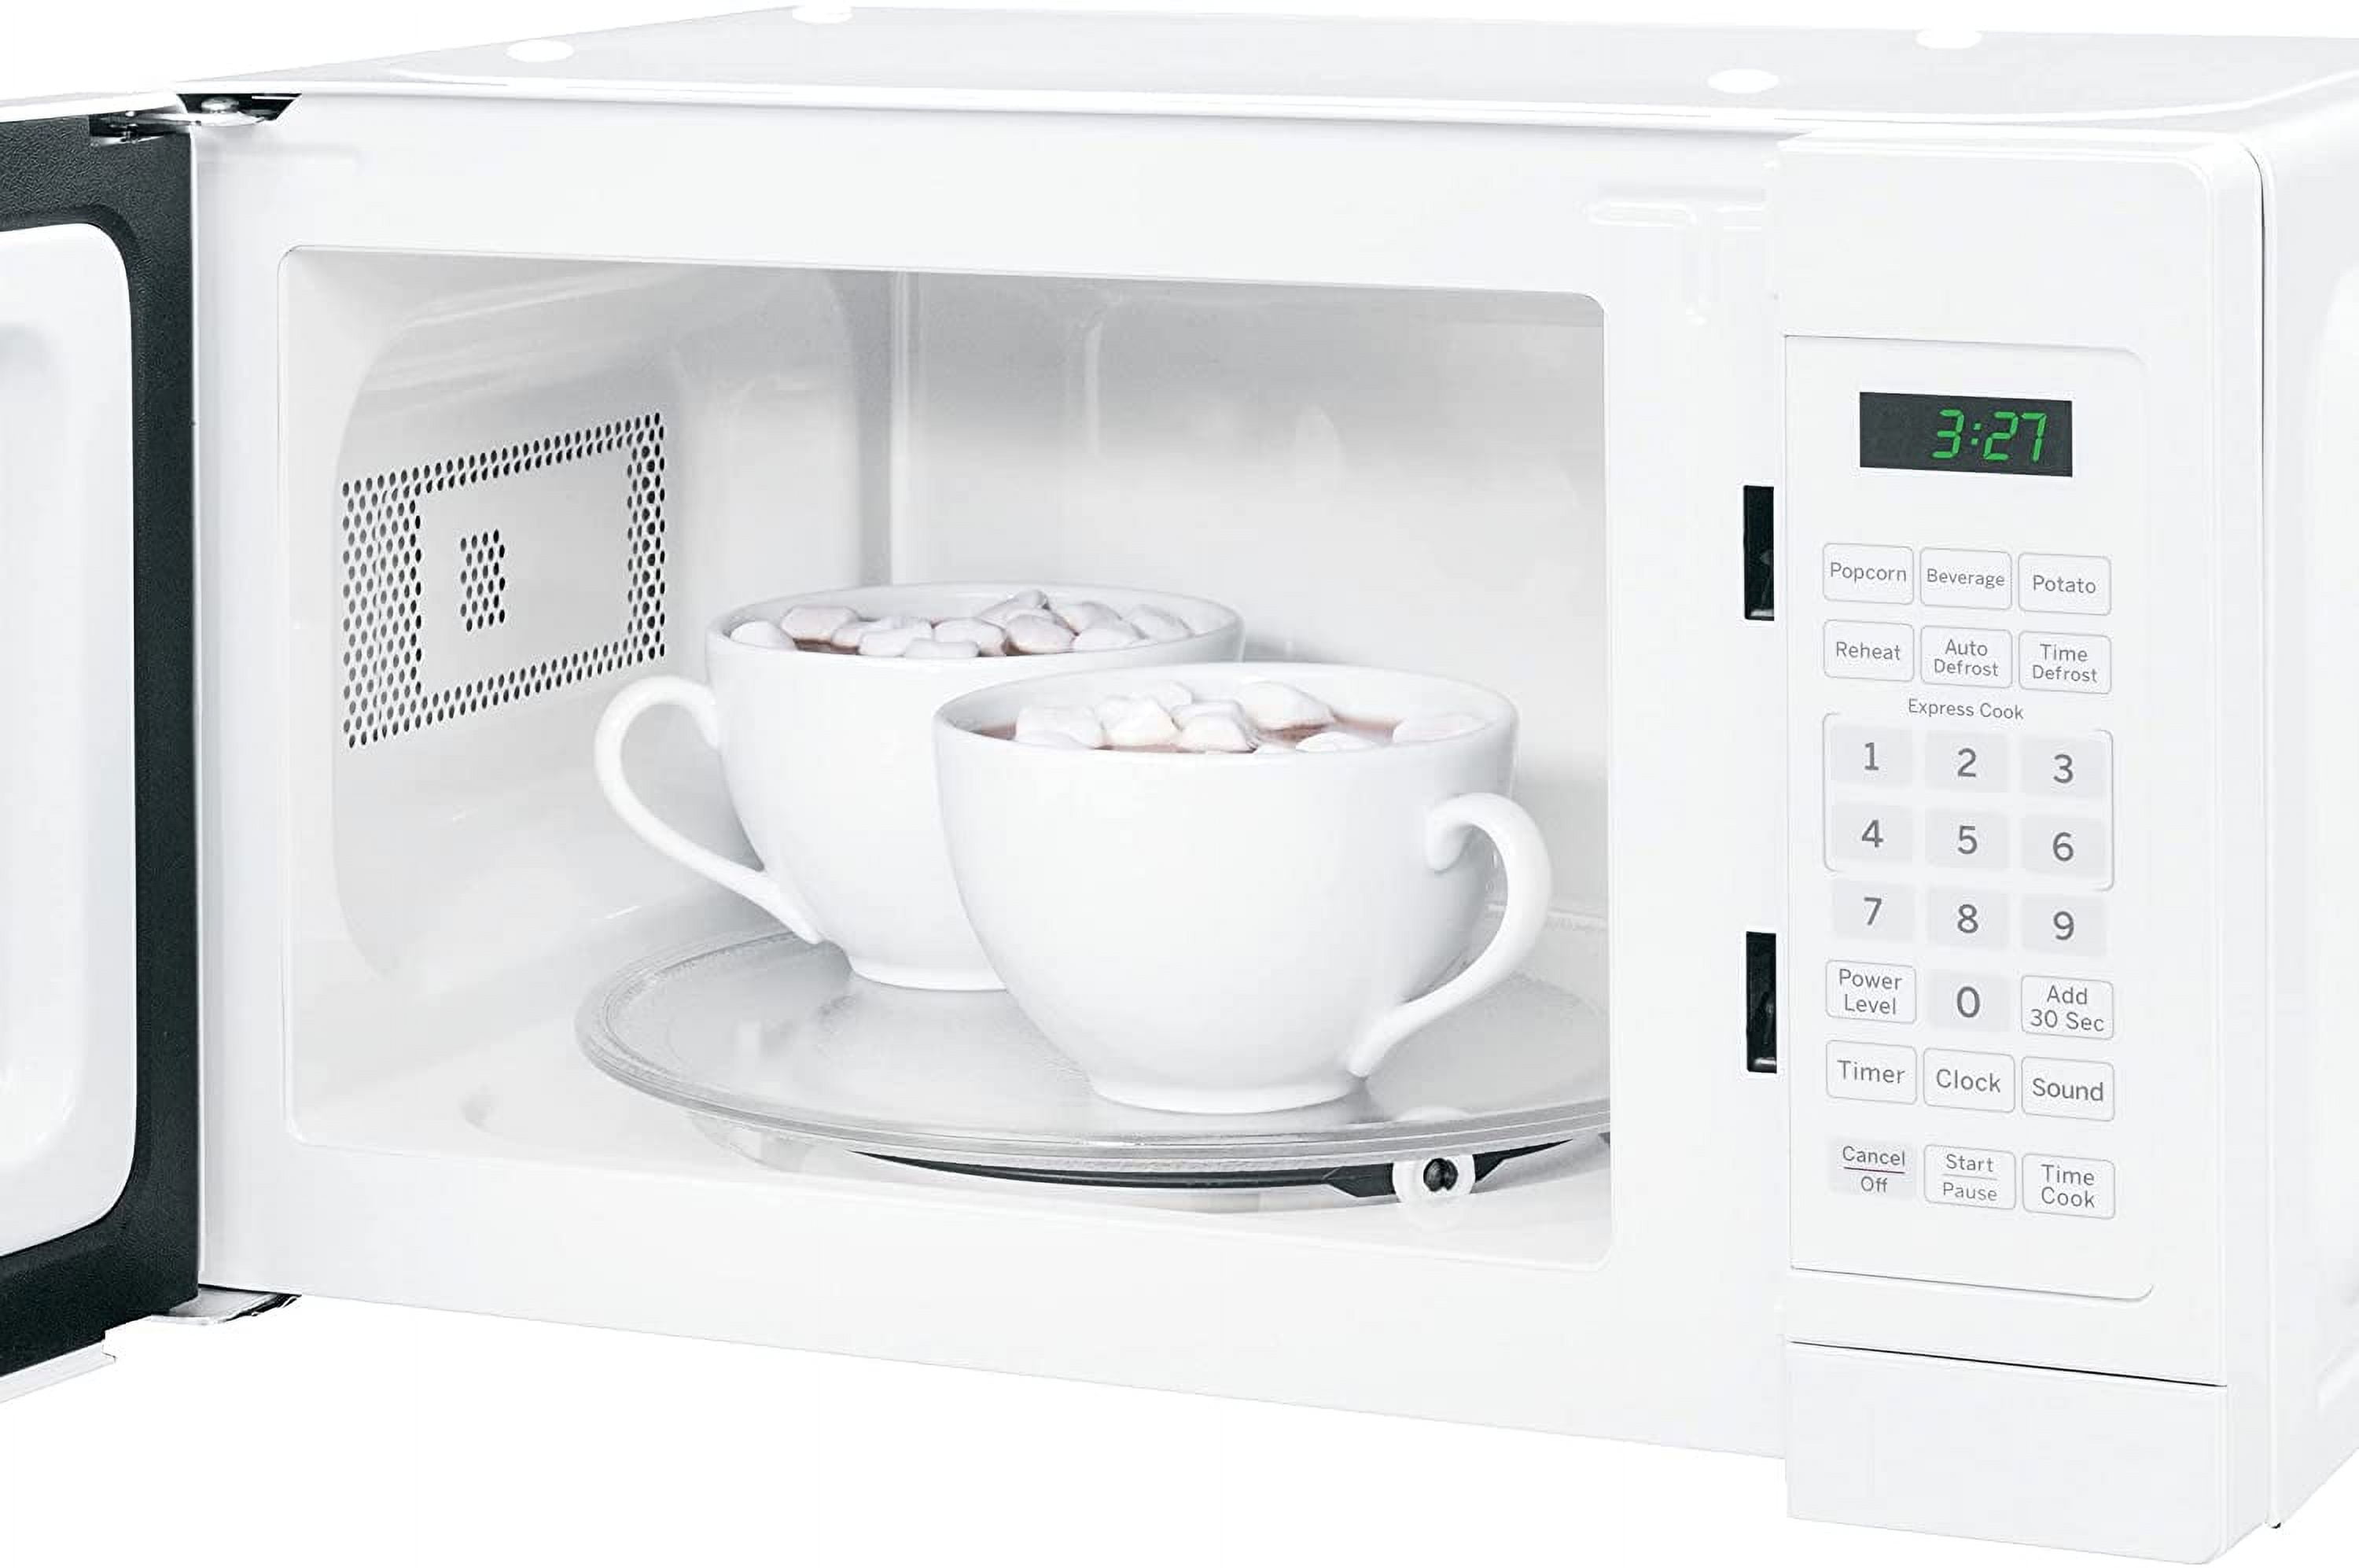 GE® 1.0 Cu. Ft. Capacity Countertop Convection Microwave Oven with